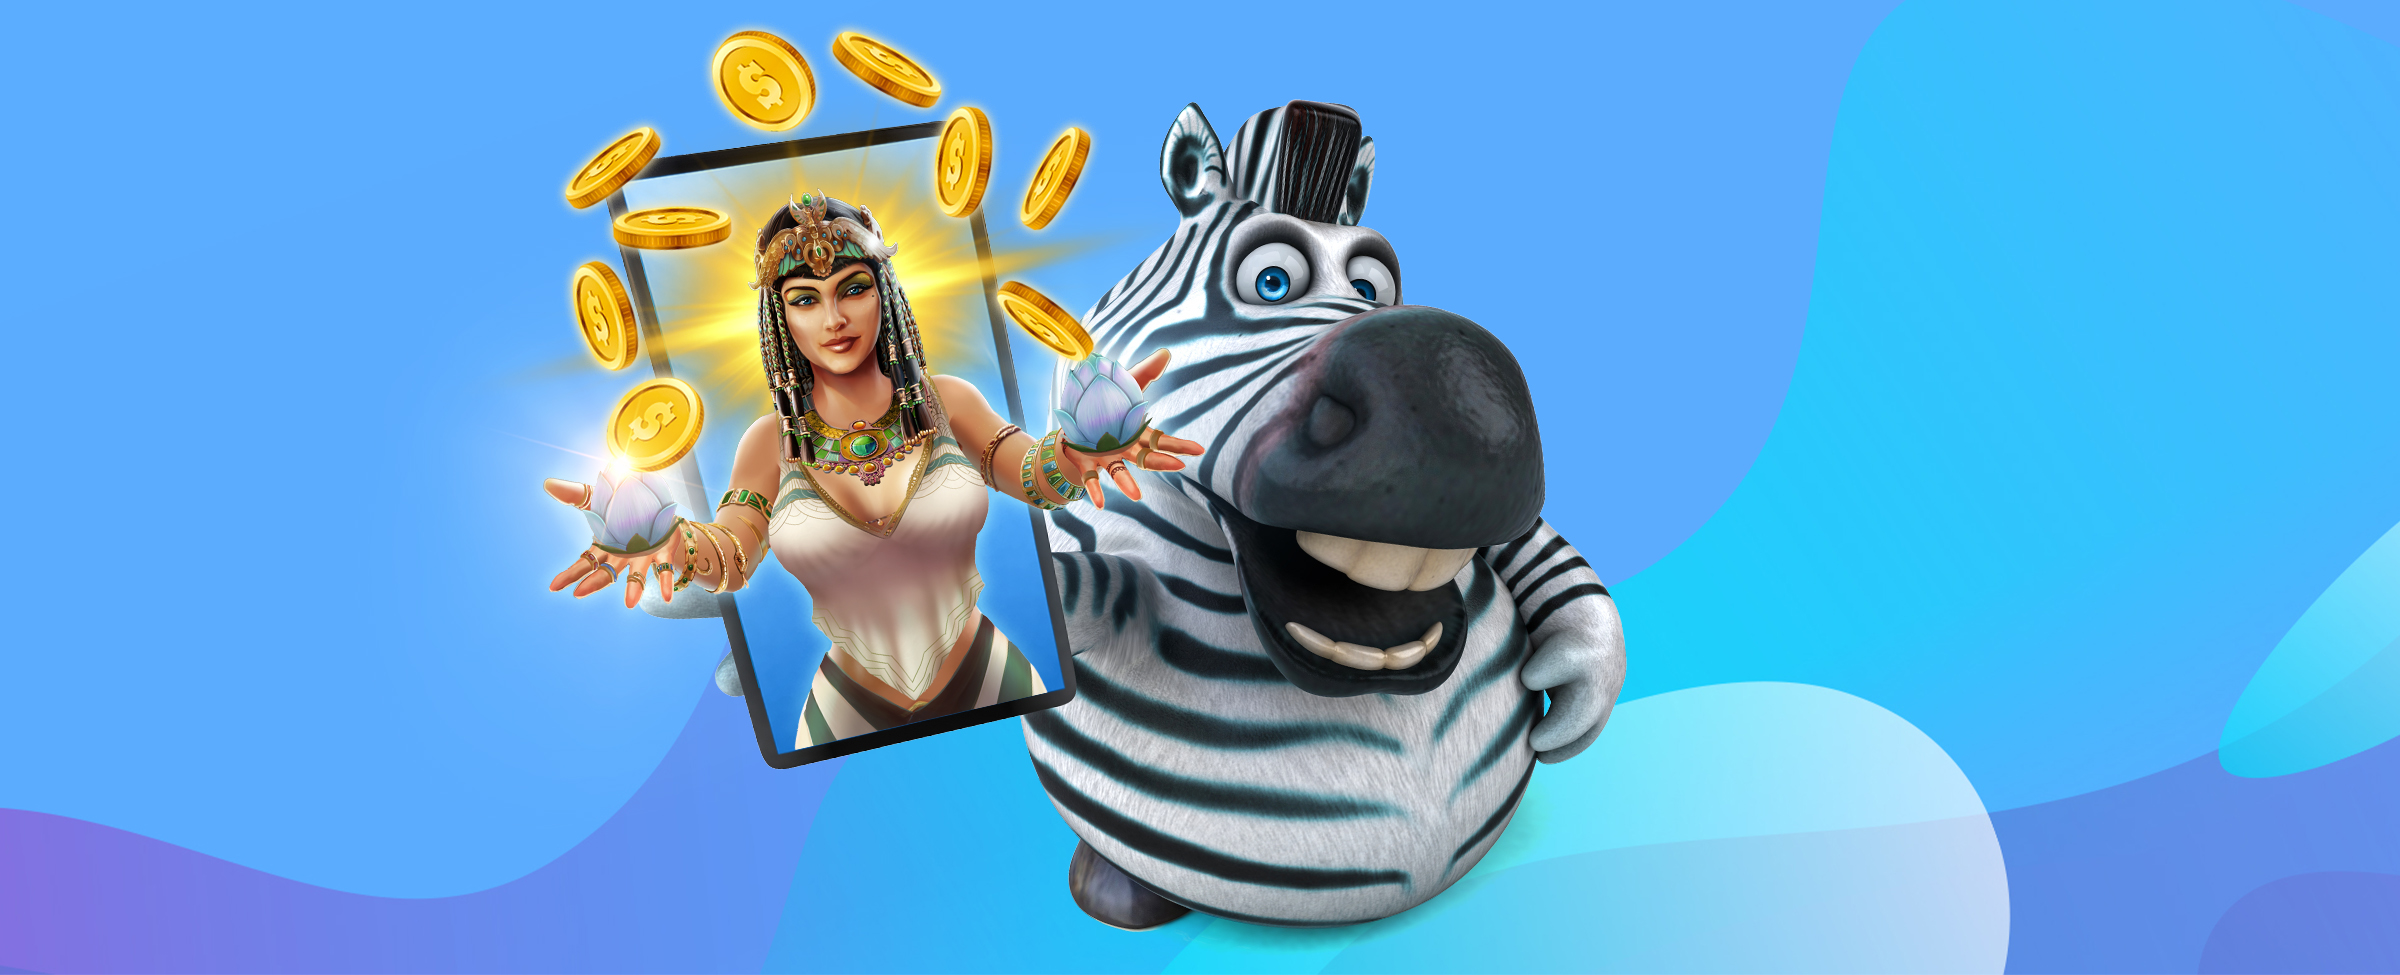 Say it with me now: F-R-E-E! Join SLotsLV as we serve up the best free online slots you can play on your mobile.